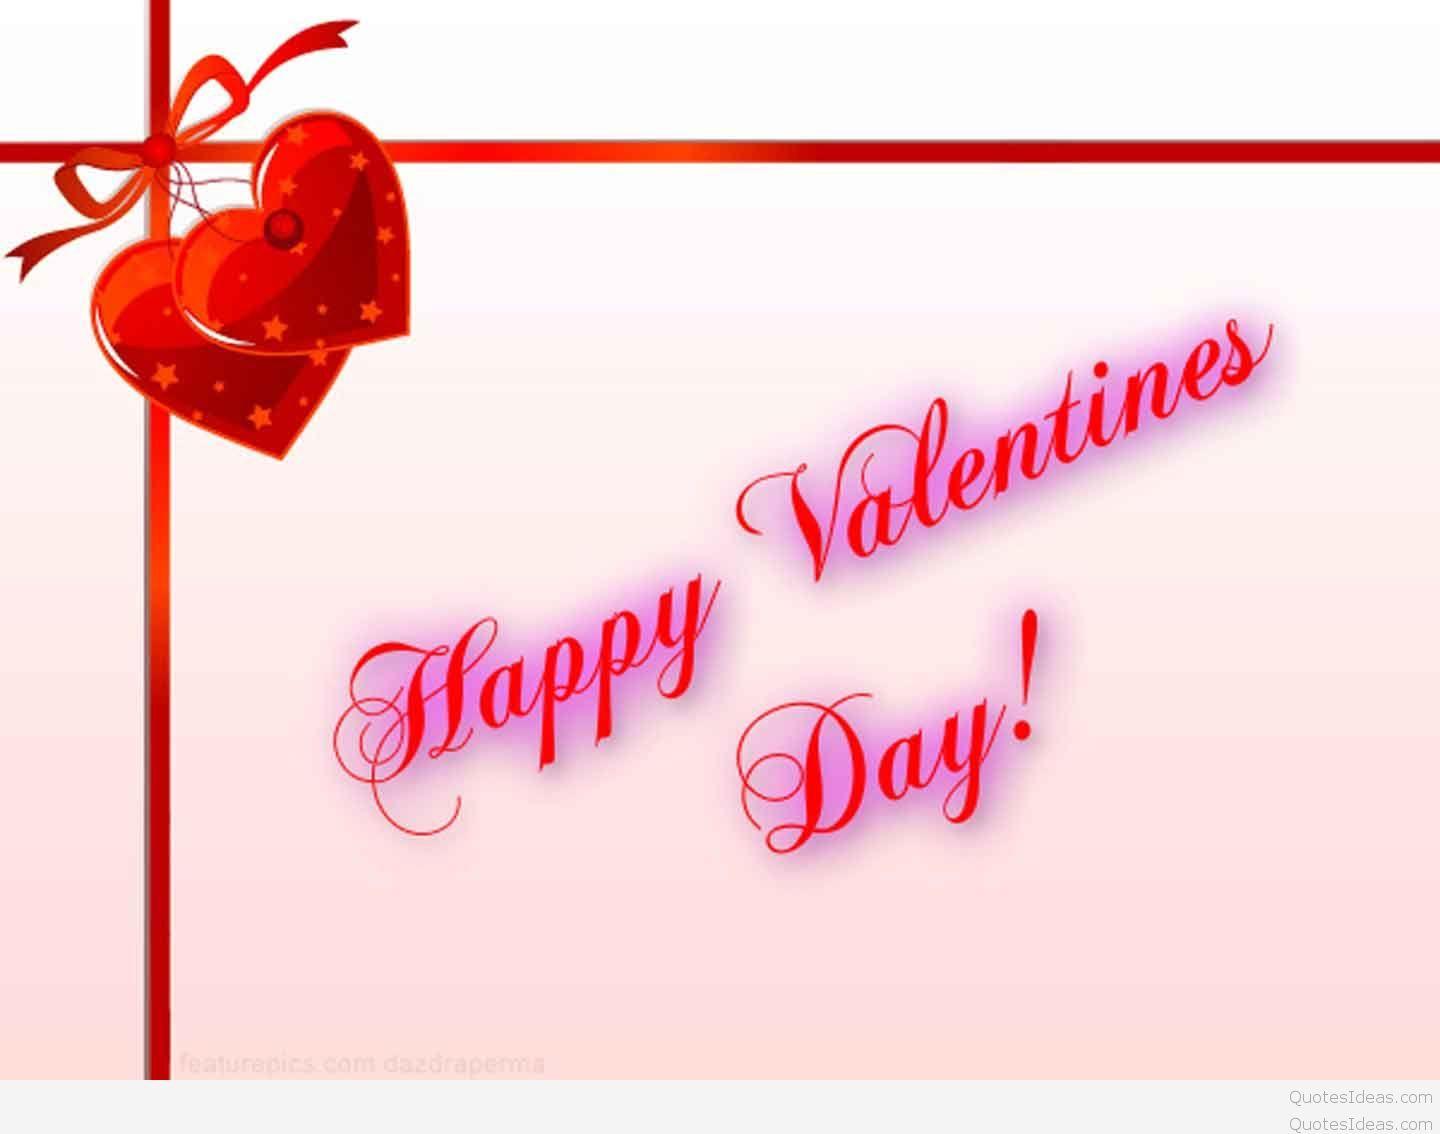 Top Sayings with Happy Valentine's day 2016 pics & image